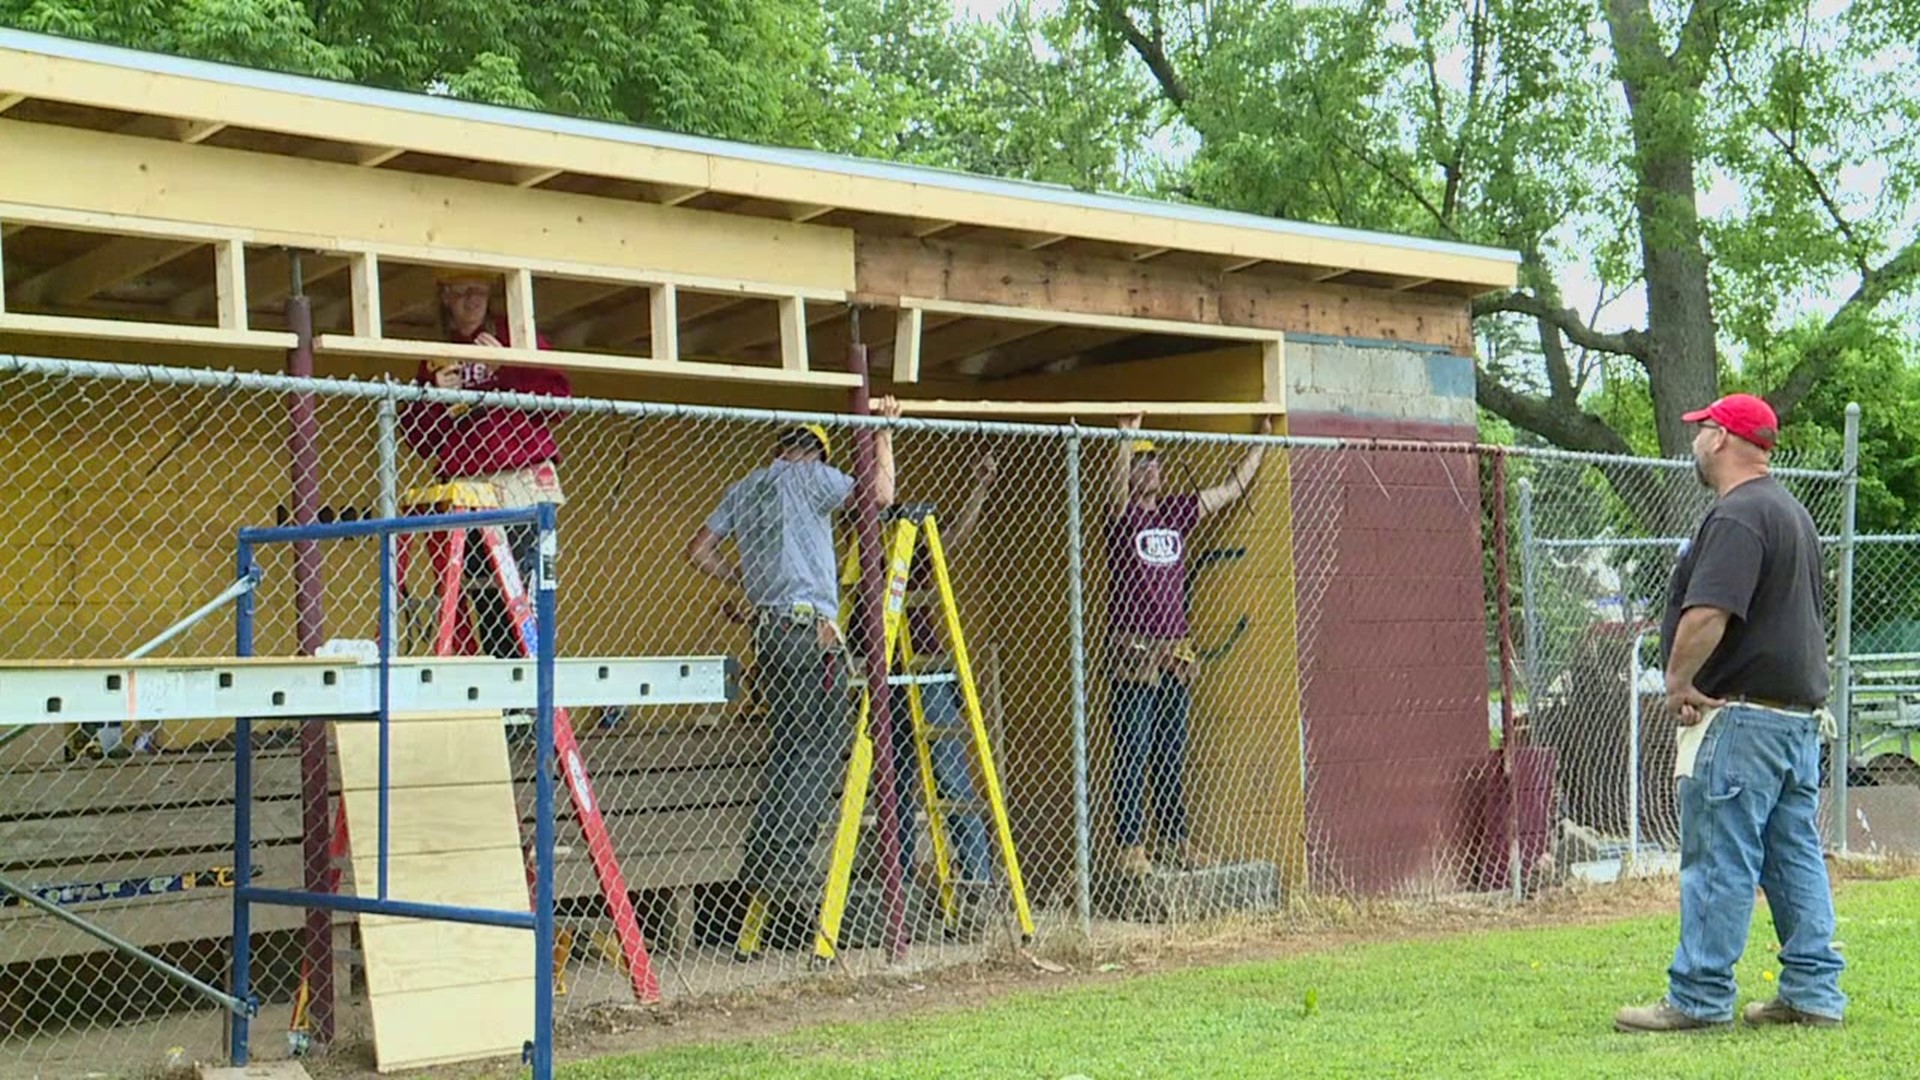 A group of Williamsport Area High School students are making repairs at Brandon Park.